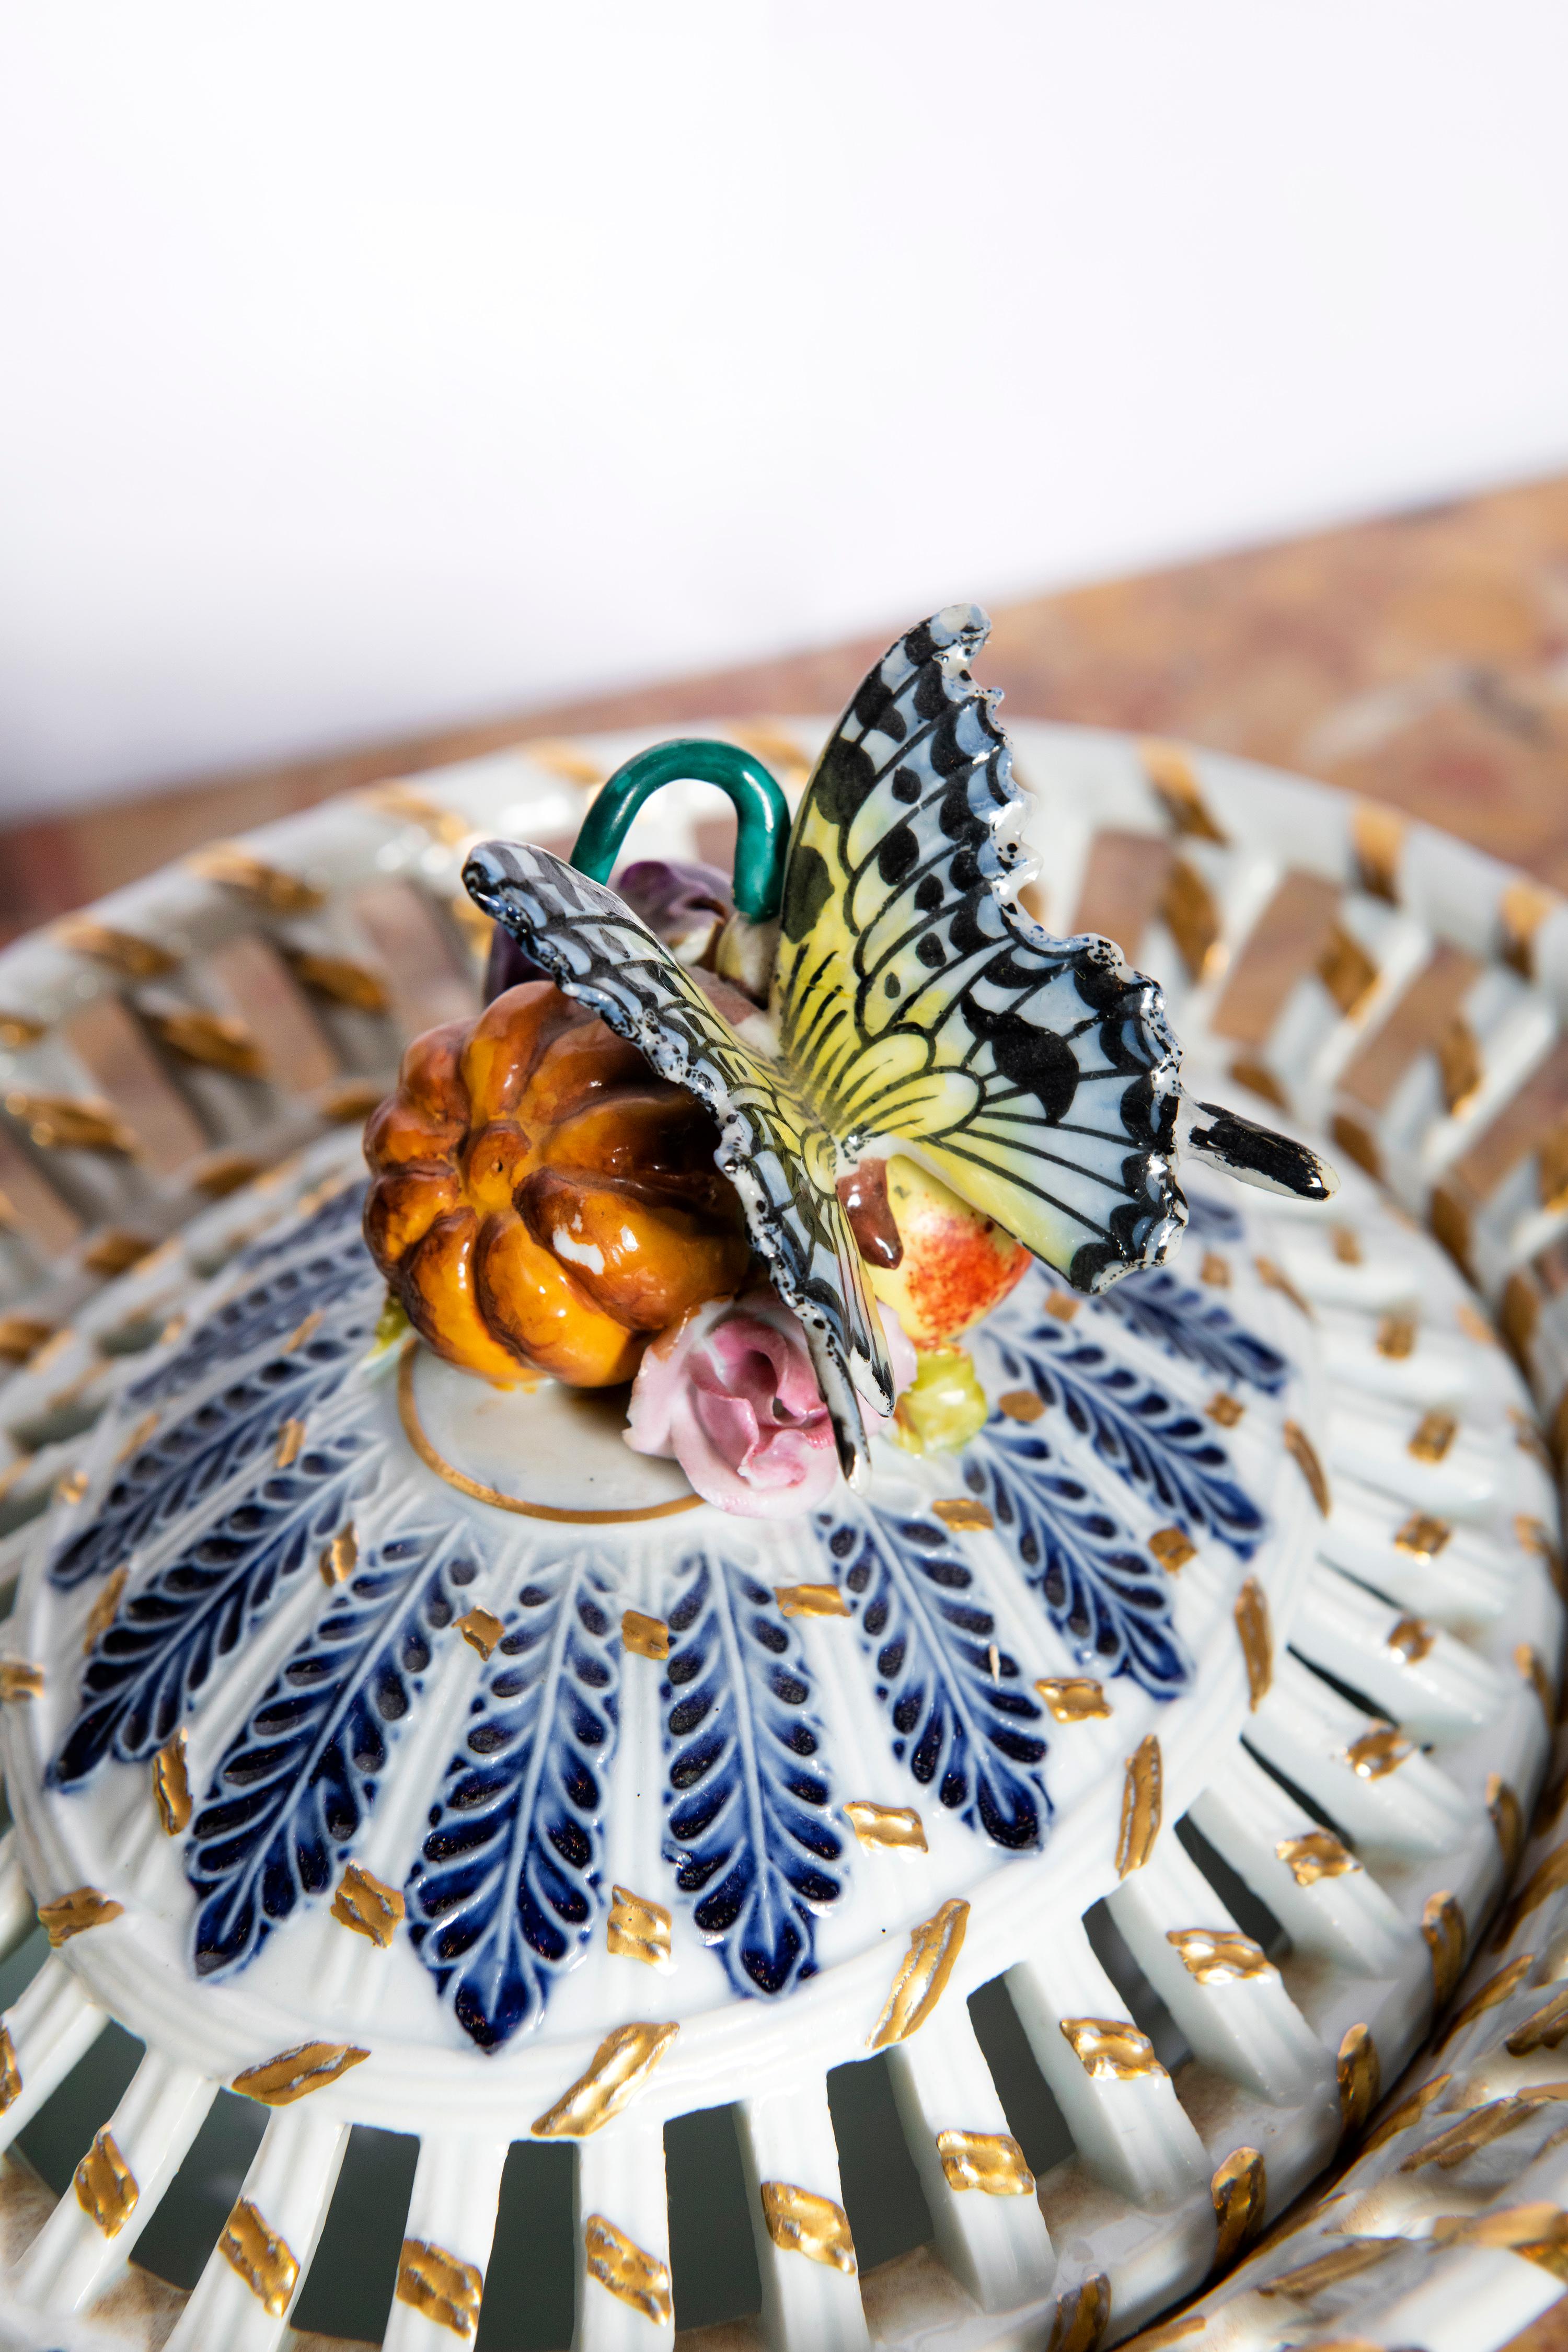 Porcelain box signed Sèvres, France, late 19th century.
Top with butterfly and fruit decoration.